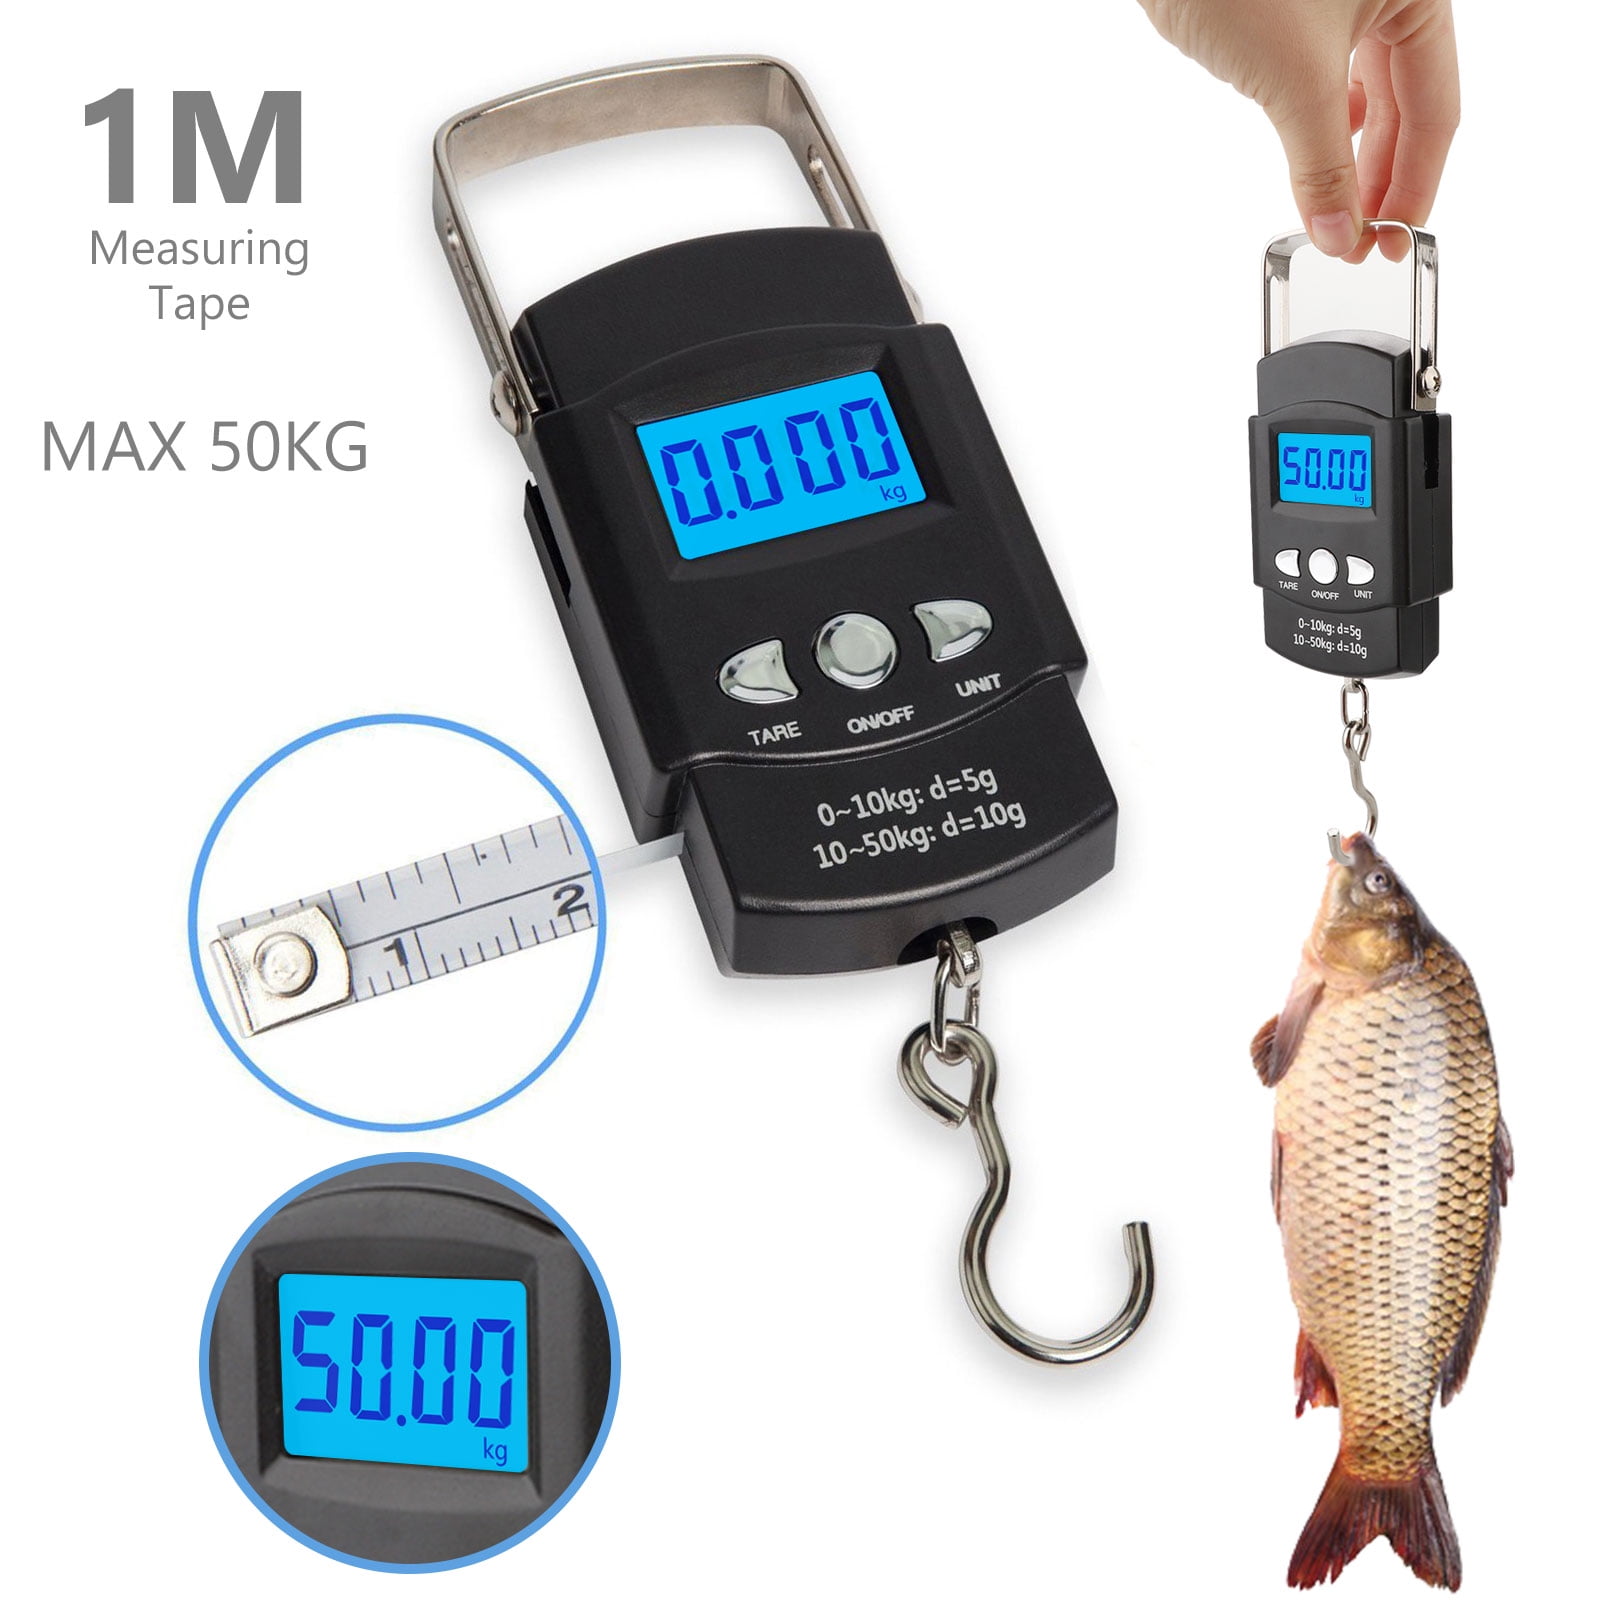 DIGITAL ELECTRONIC FISHING WEIGHING SCALE Stylish Without Battery 110lb/50kg 